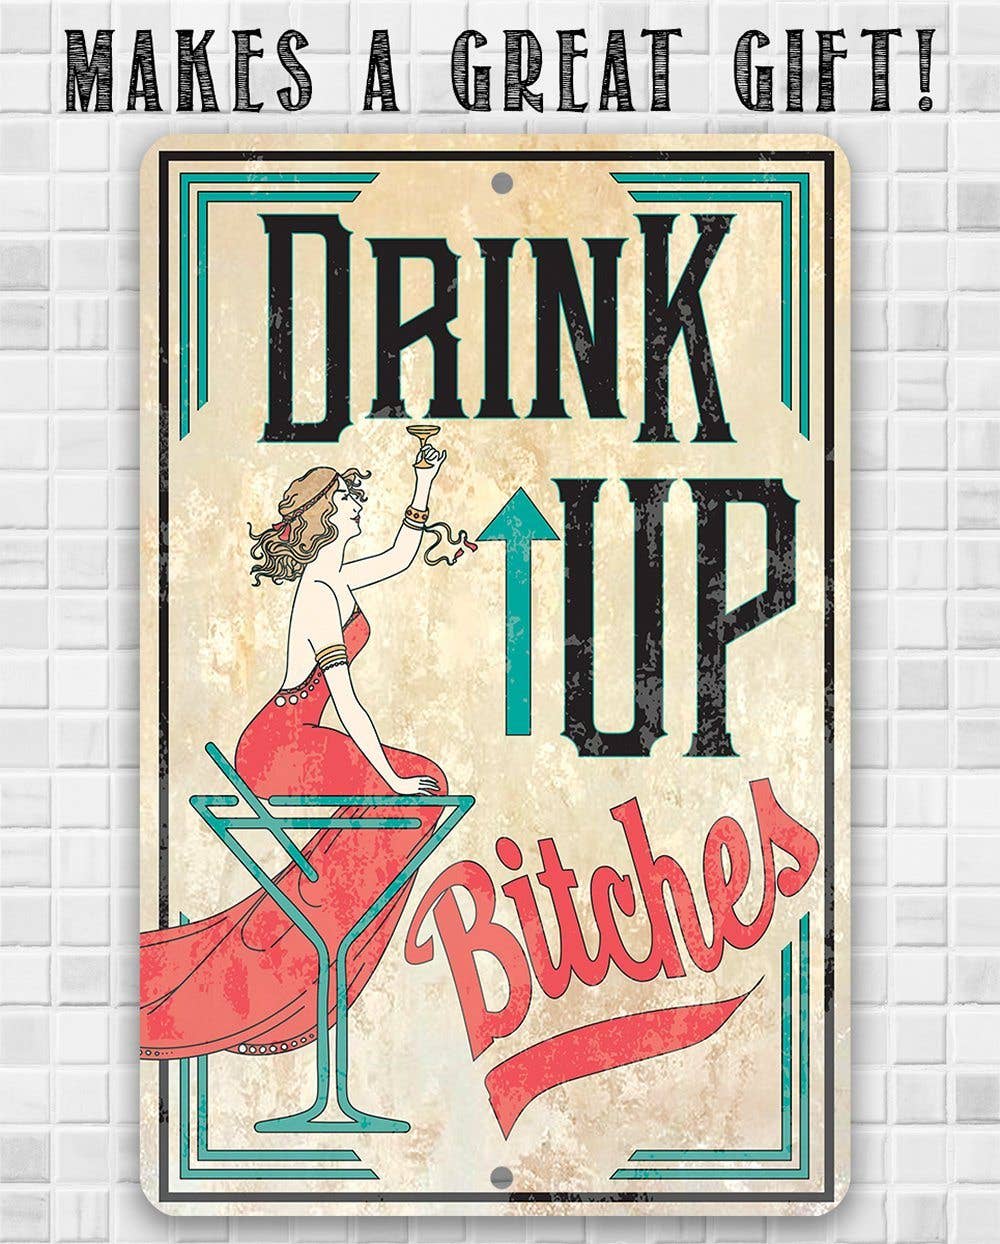 Drink Up Bitches - Metal Sign: 8 x 12